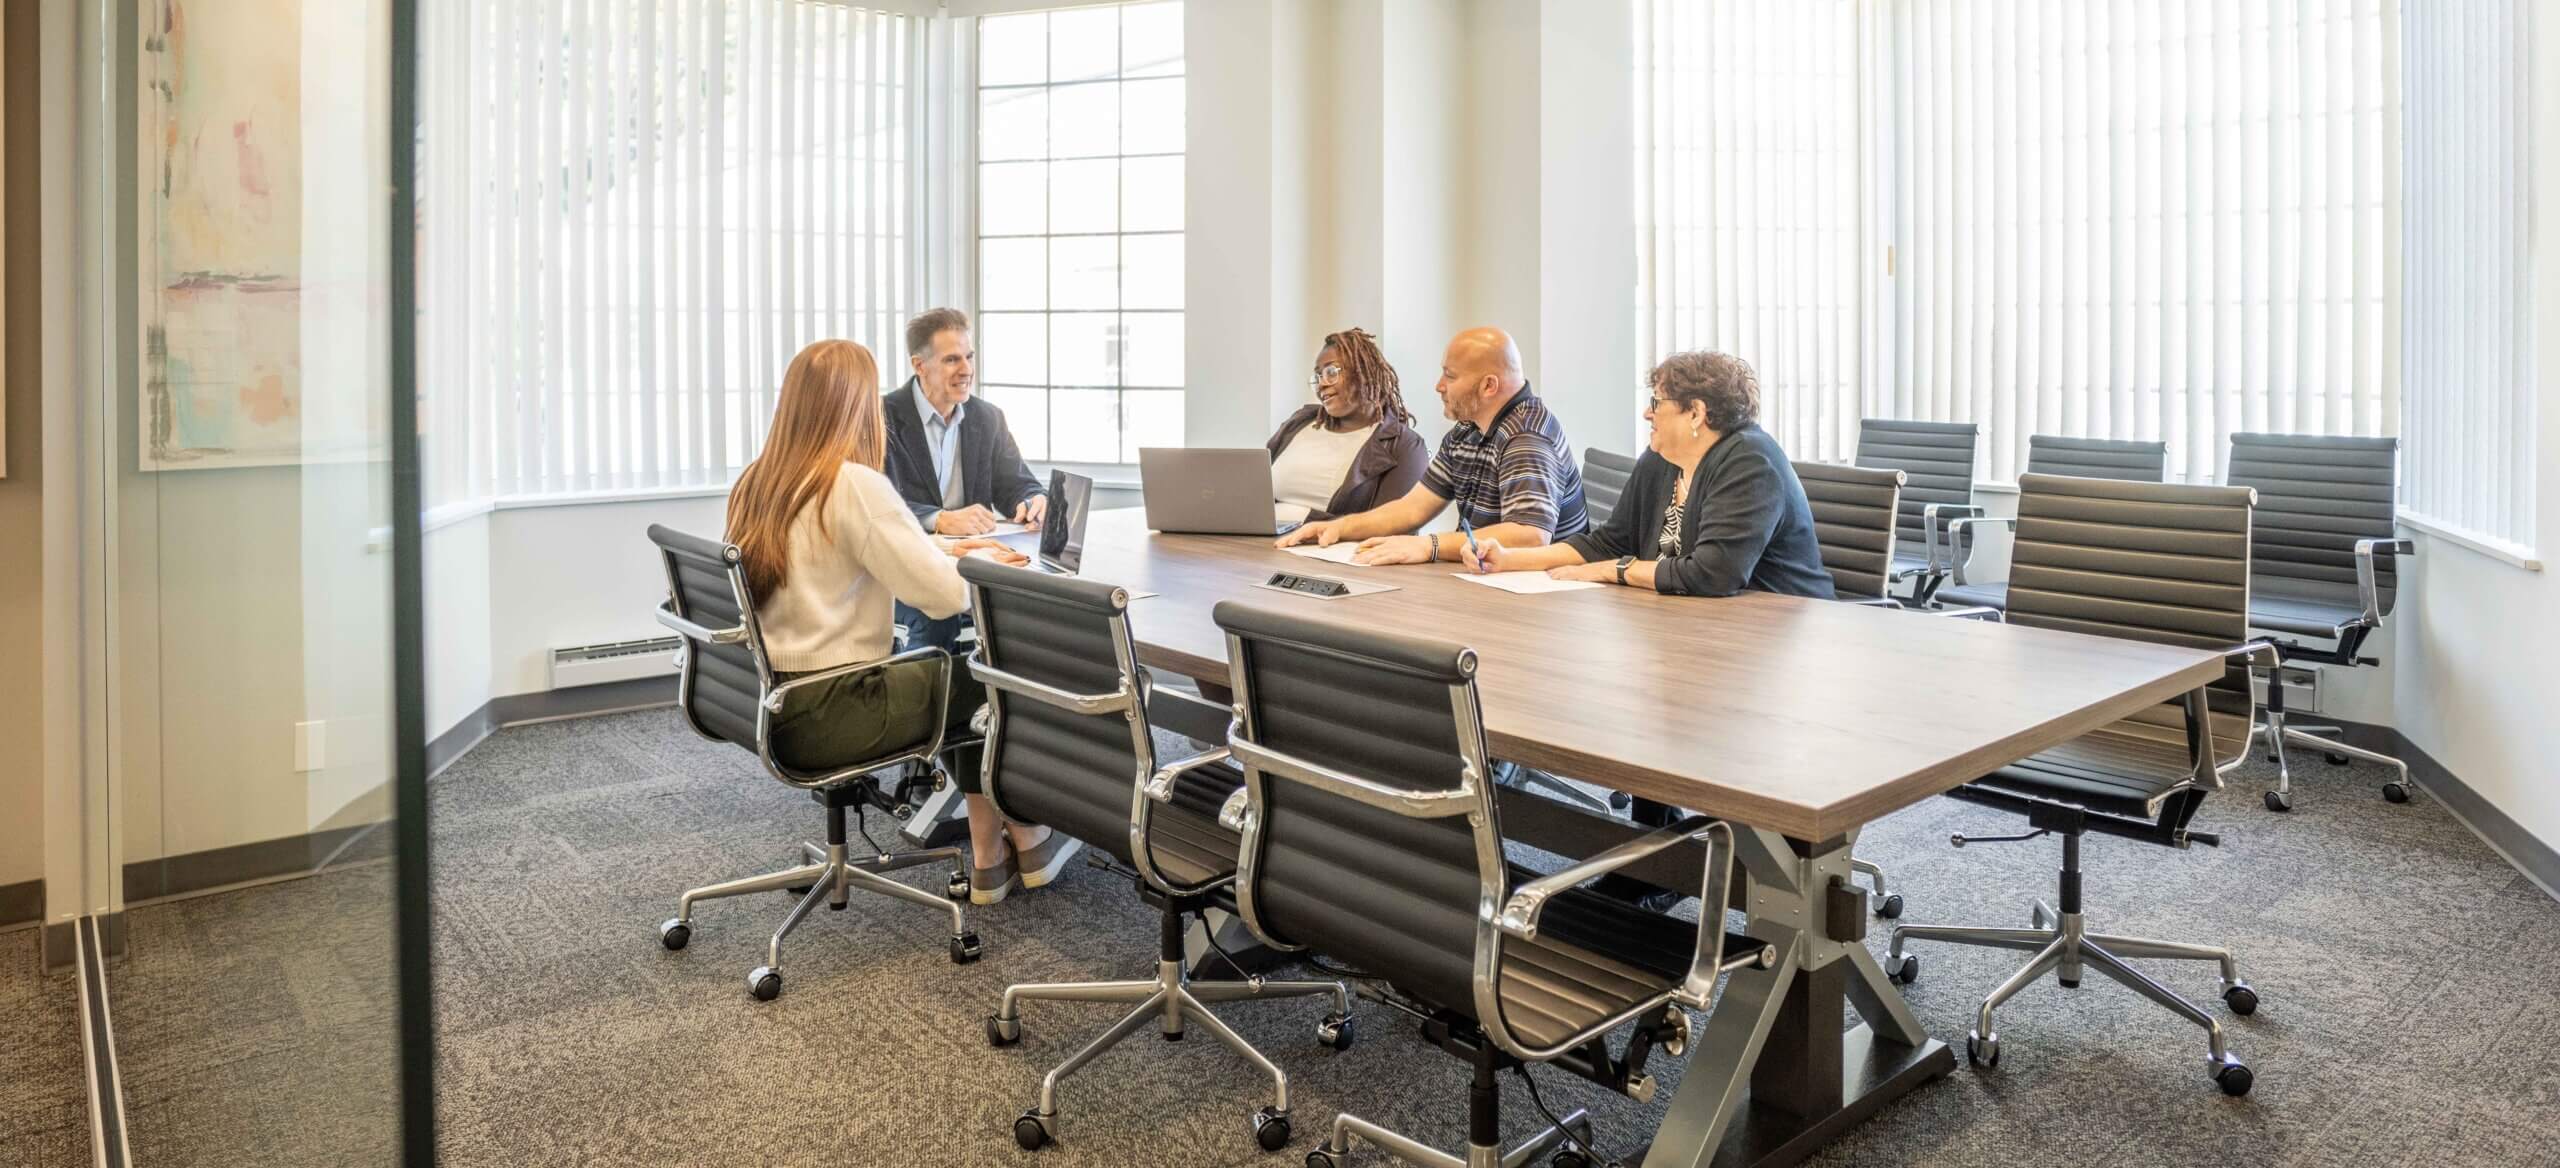 Employees sitting at conference room table talking to each other